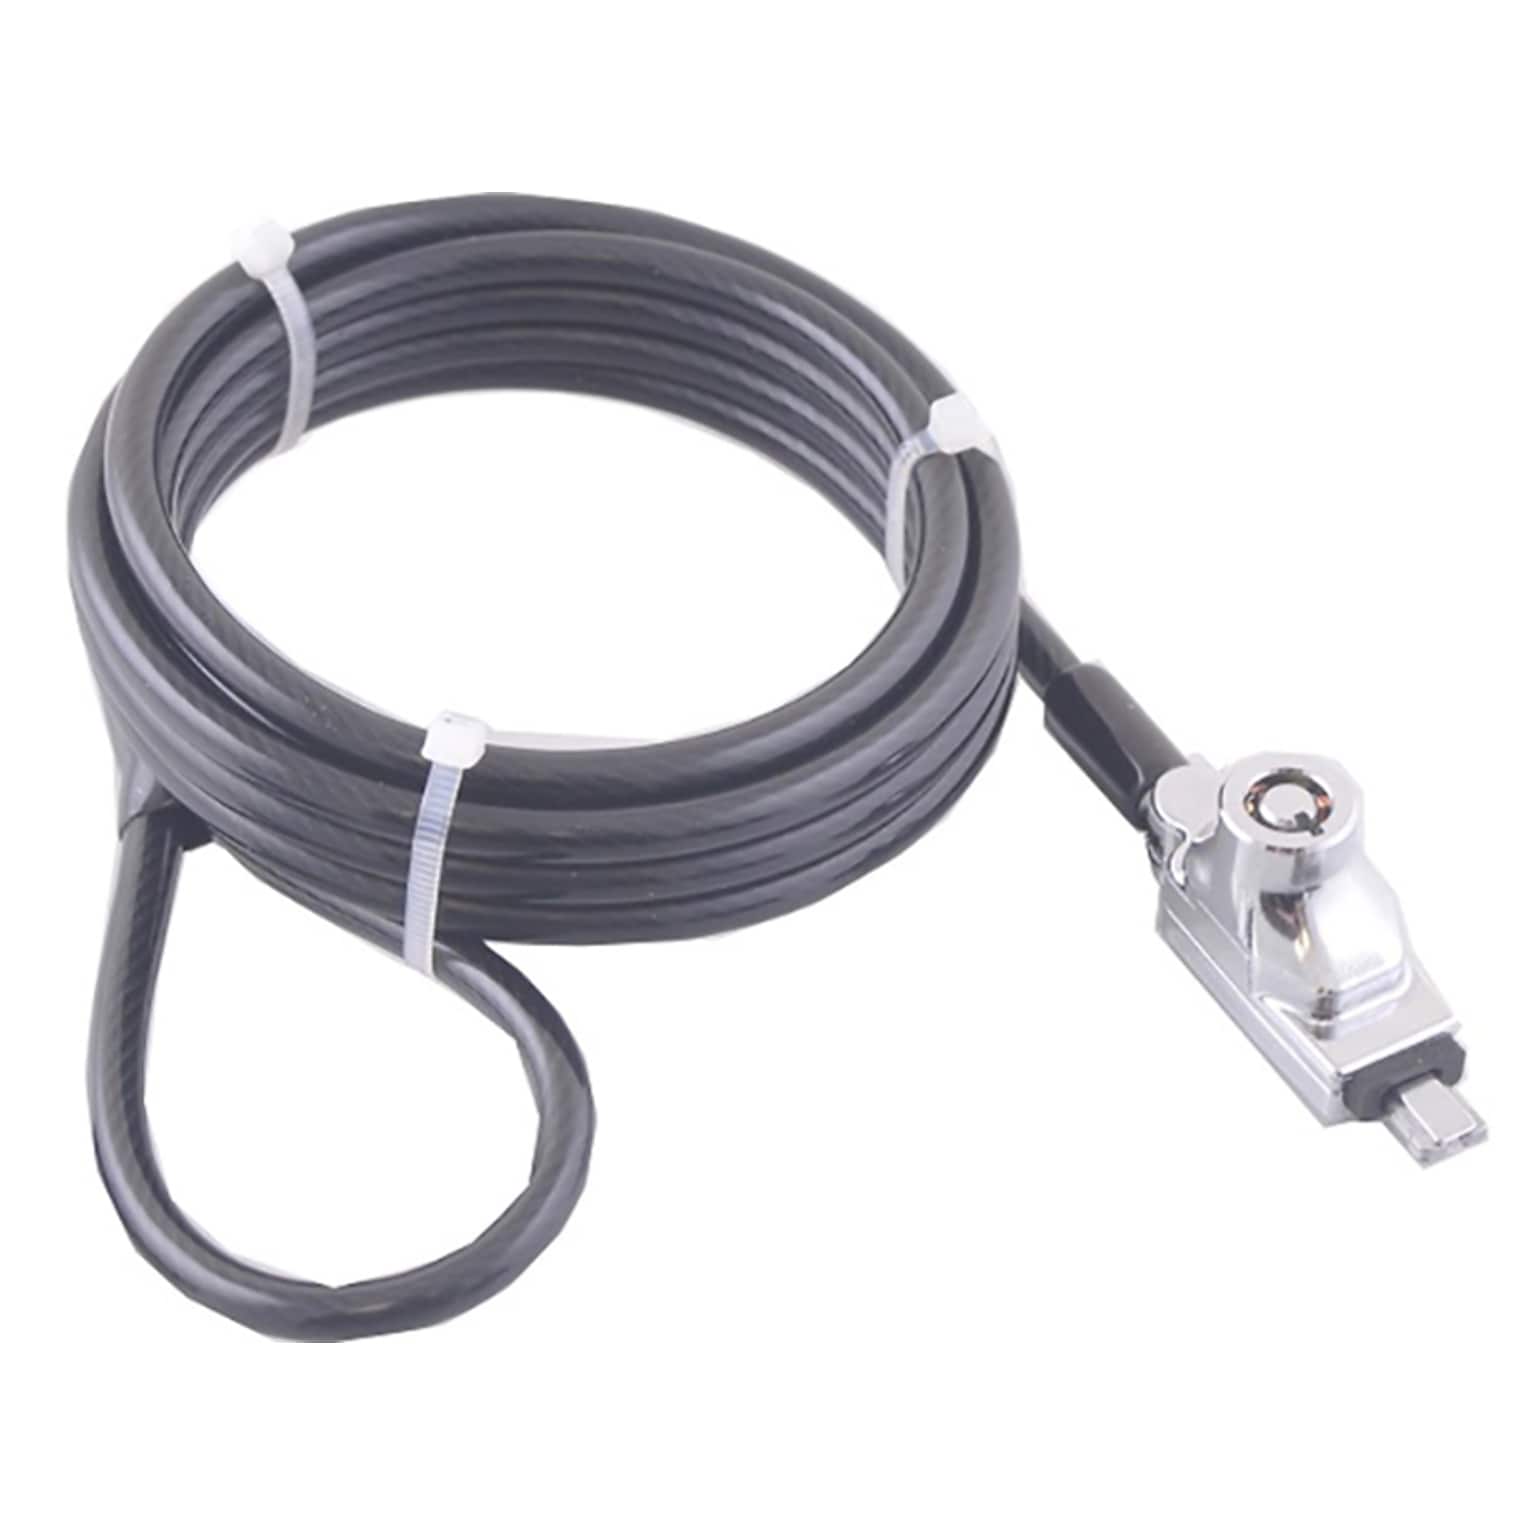 CODi Bilateral II Key Cable Lock for Laptops, 6 ft.  (A02041)